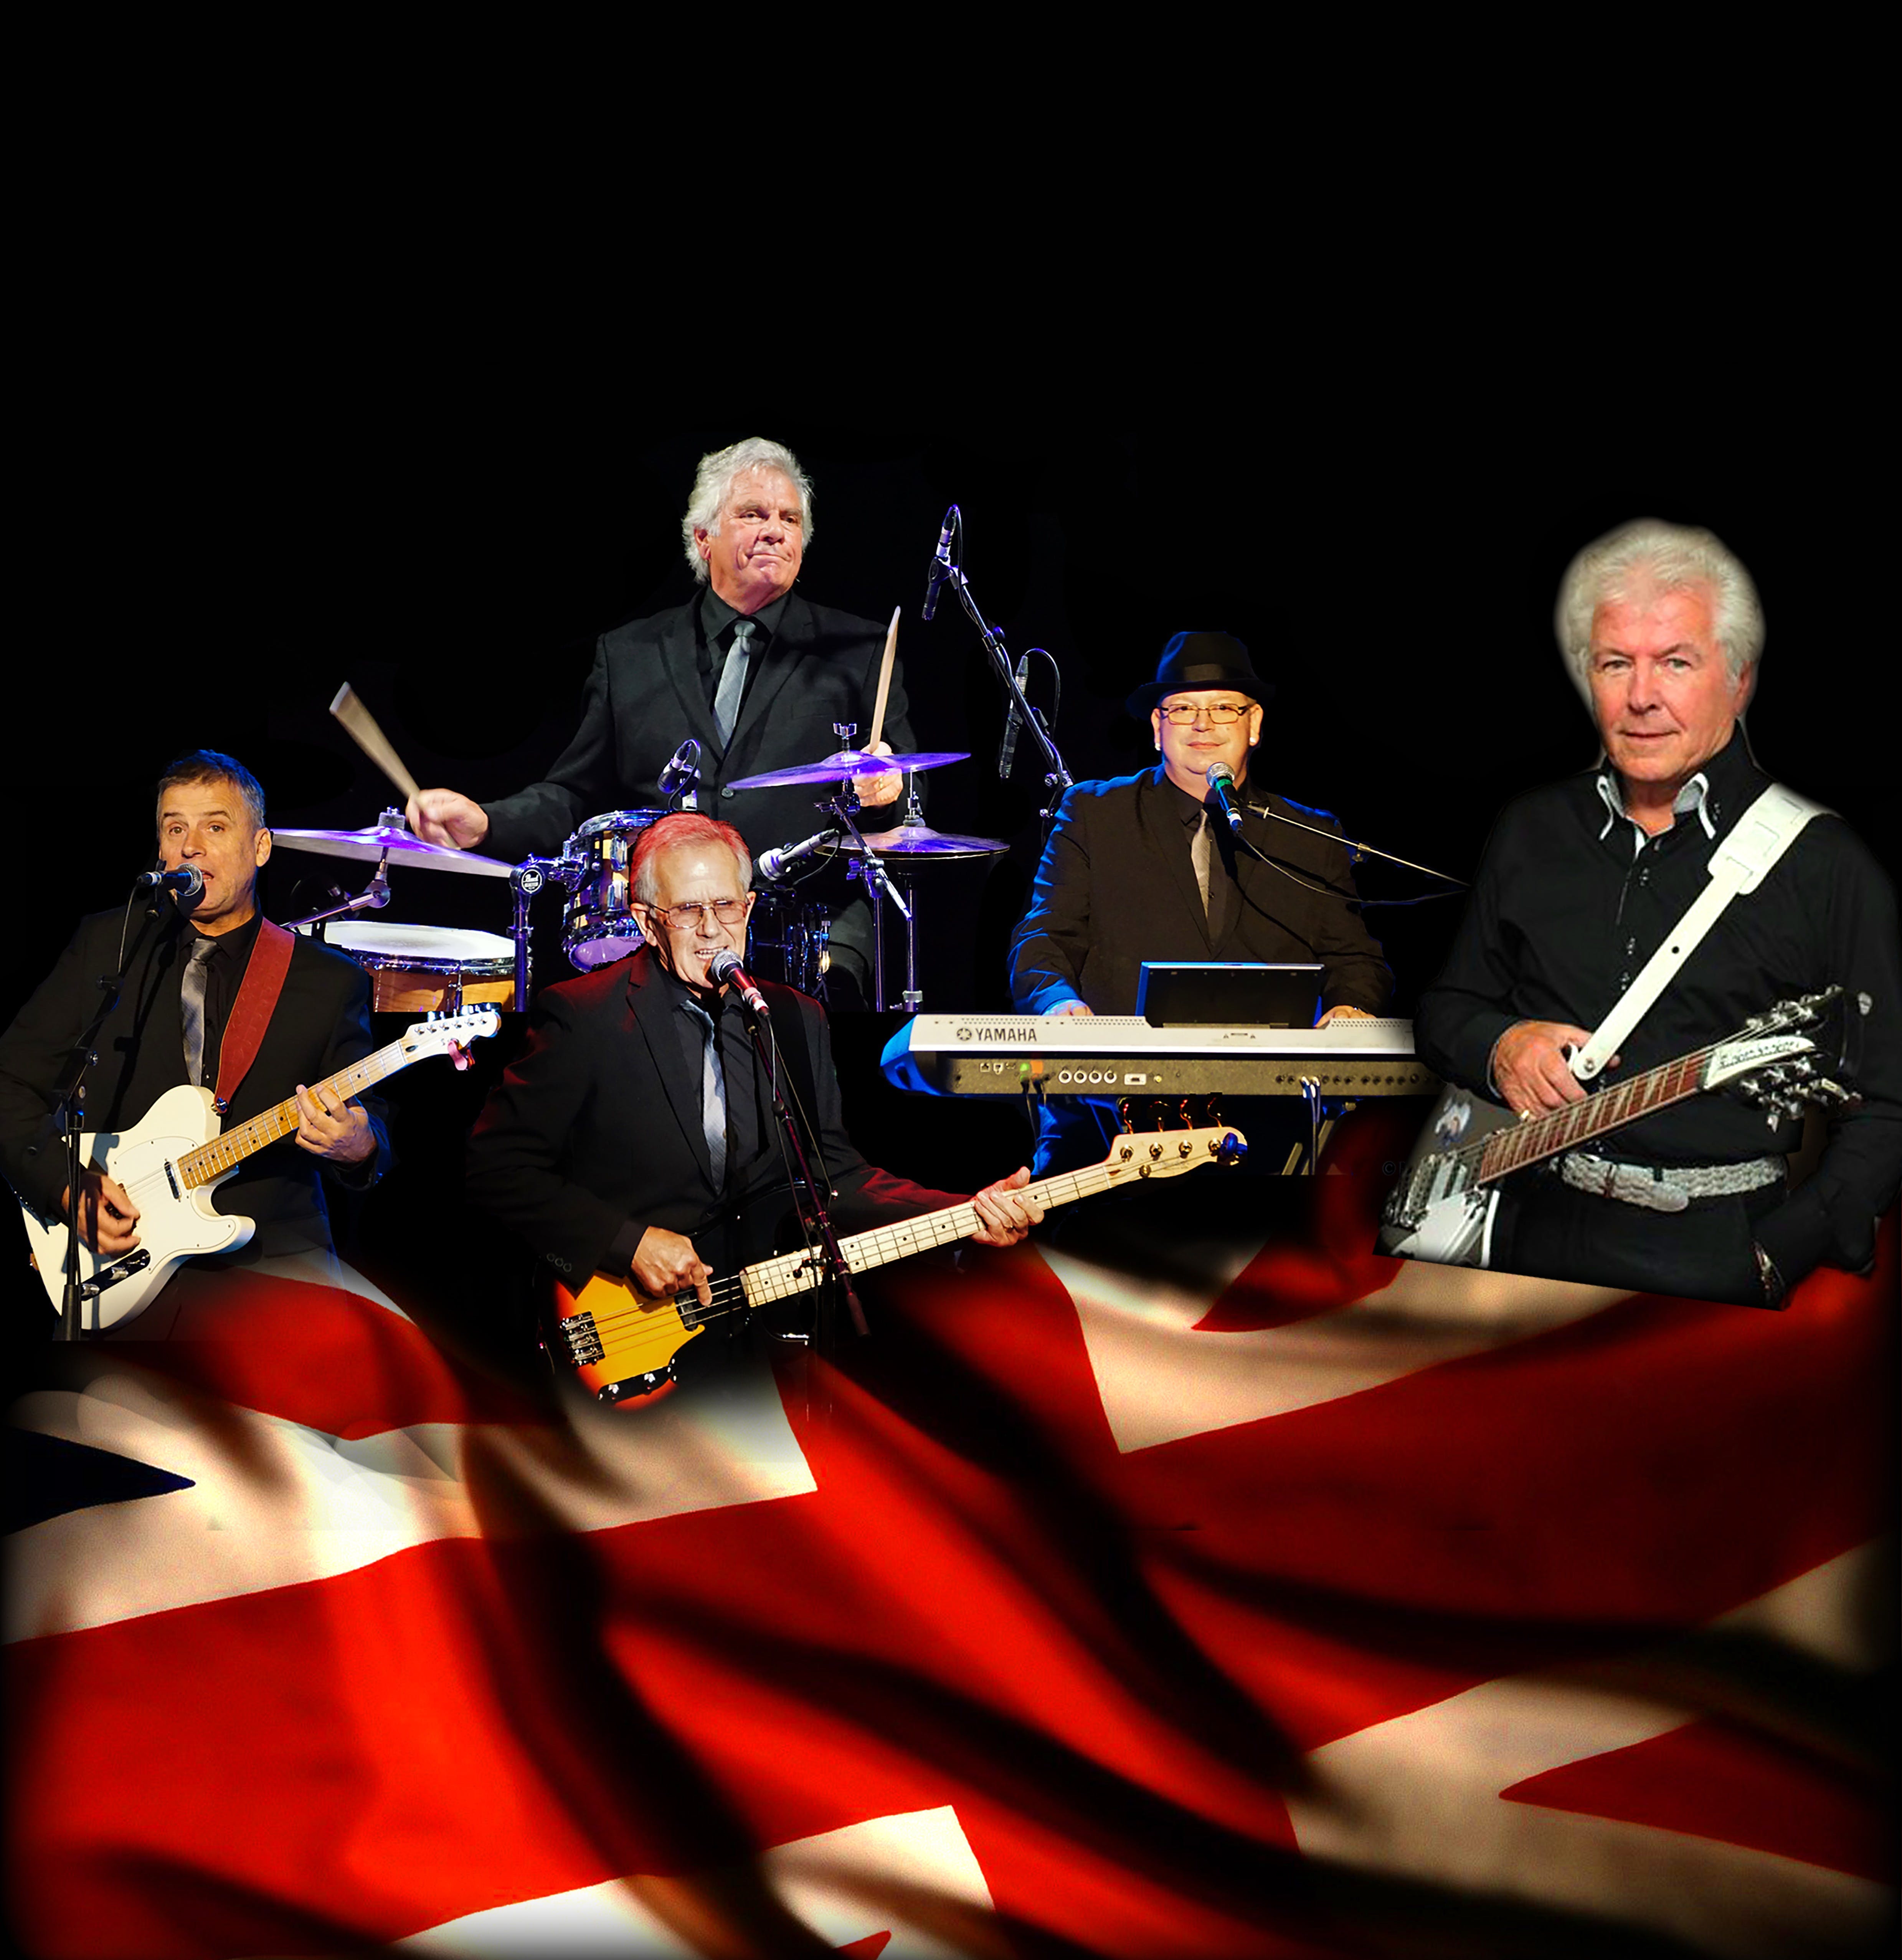 Herman's Hermits with Special Guest Mike Pender - The Six O'Clock Hop - Perisher Accommodation